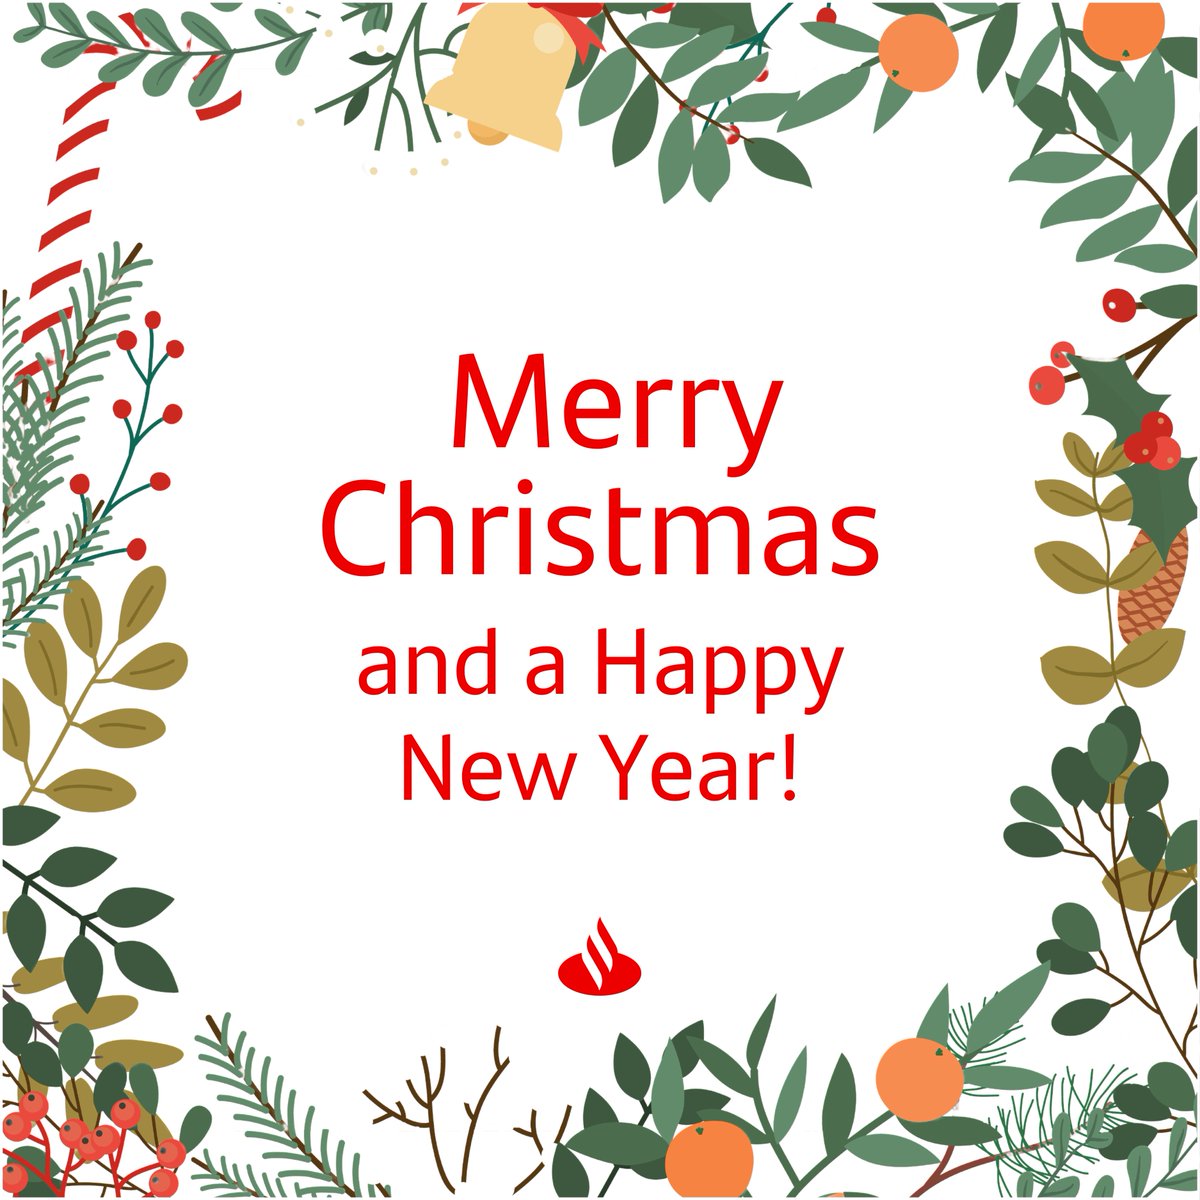 We'd like to wish all of our customers and colleagues a very Merry Christmas, to those who are celebrating. We hope that everybody enjoys the long weekend and has a Happy New Year when it comes.